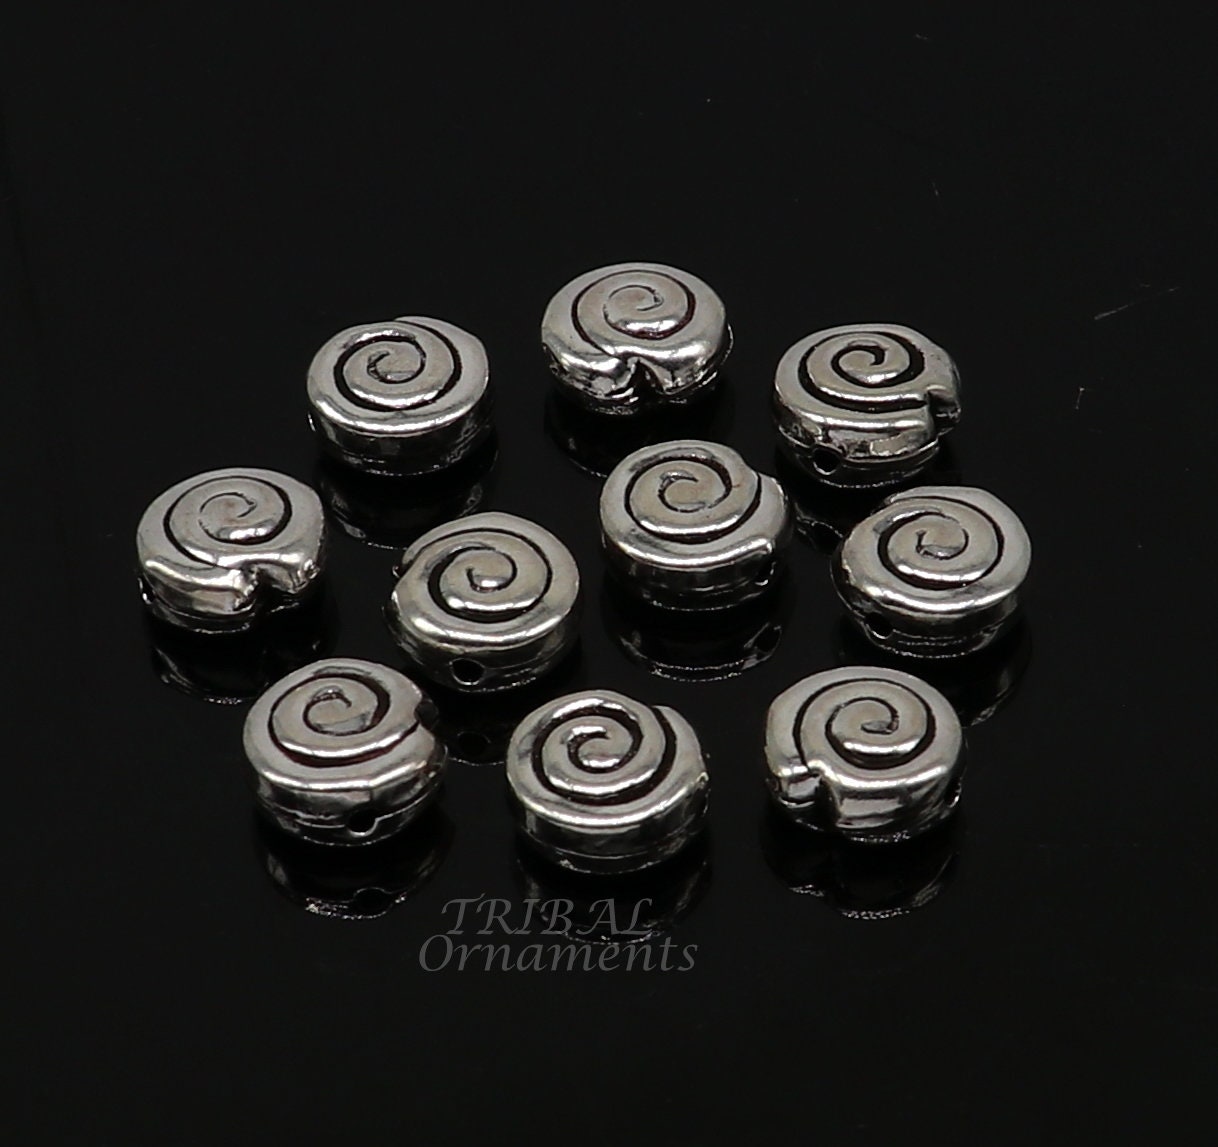 12 mm lot 10 pieces 925 sterling silver fabulous beads drops for custom jewelry making lose beads bd23 - TRIBAL ORNAMENTS